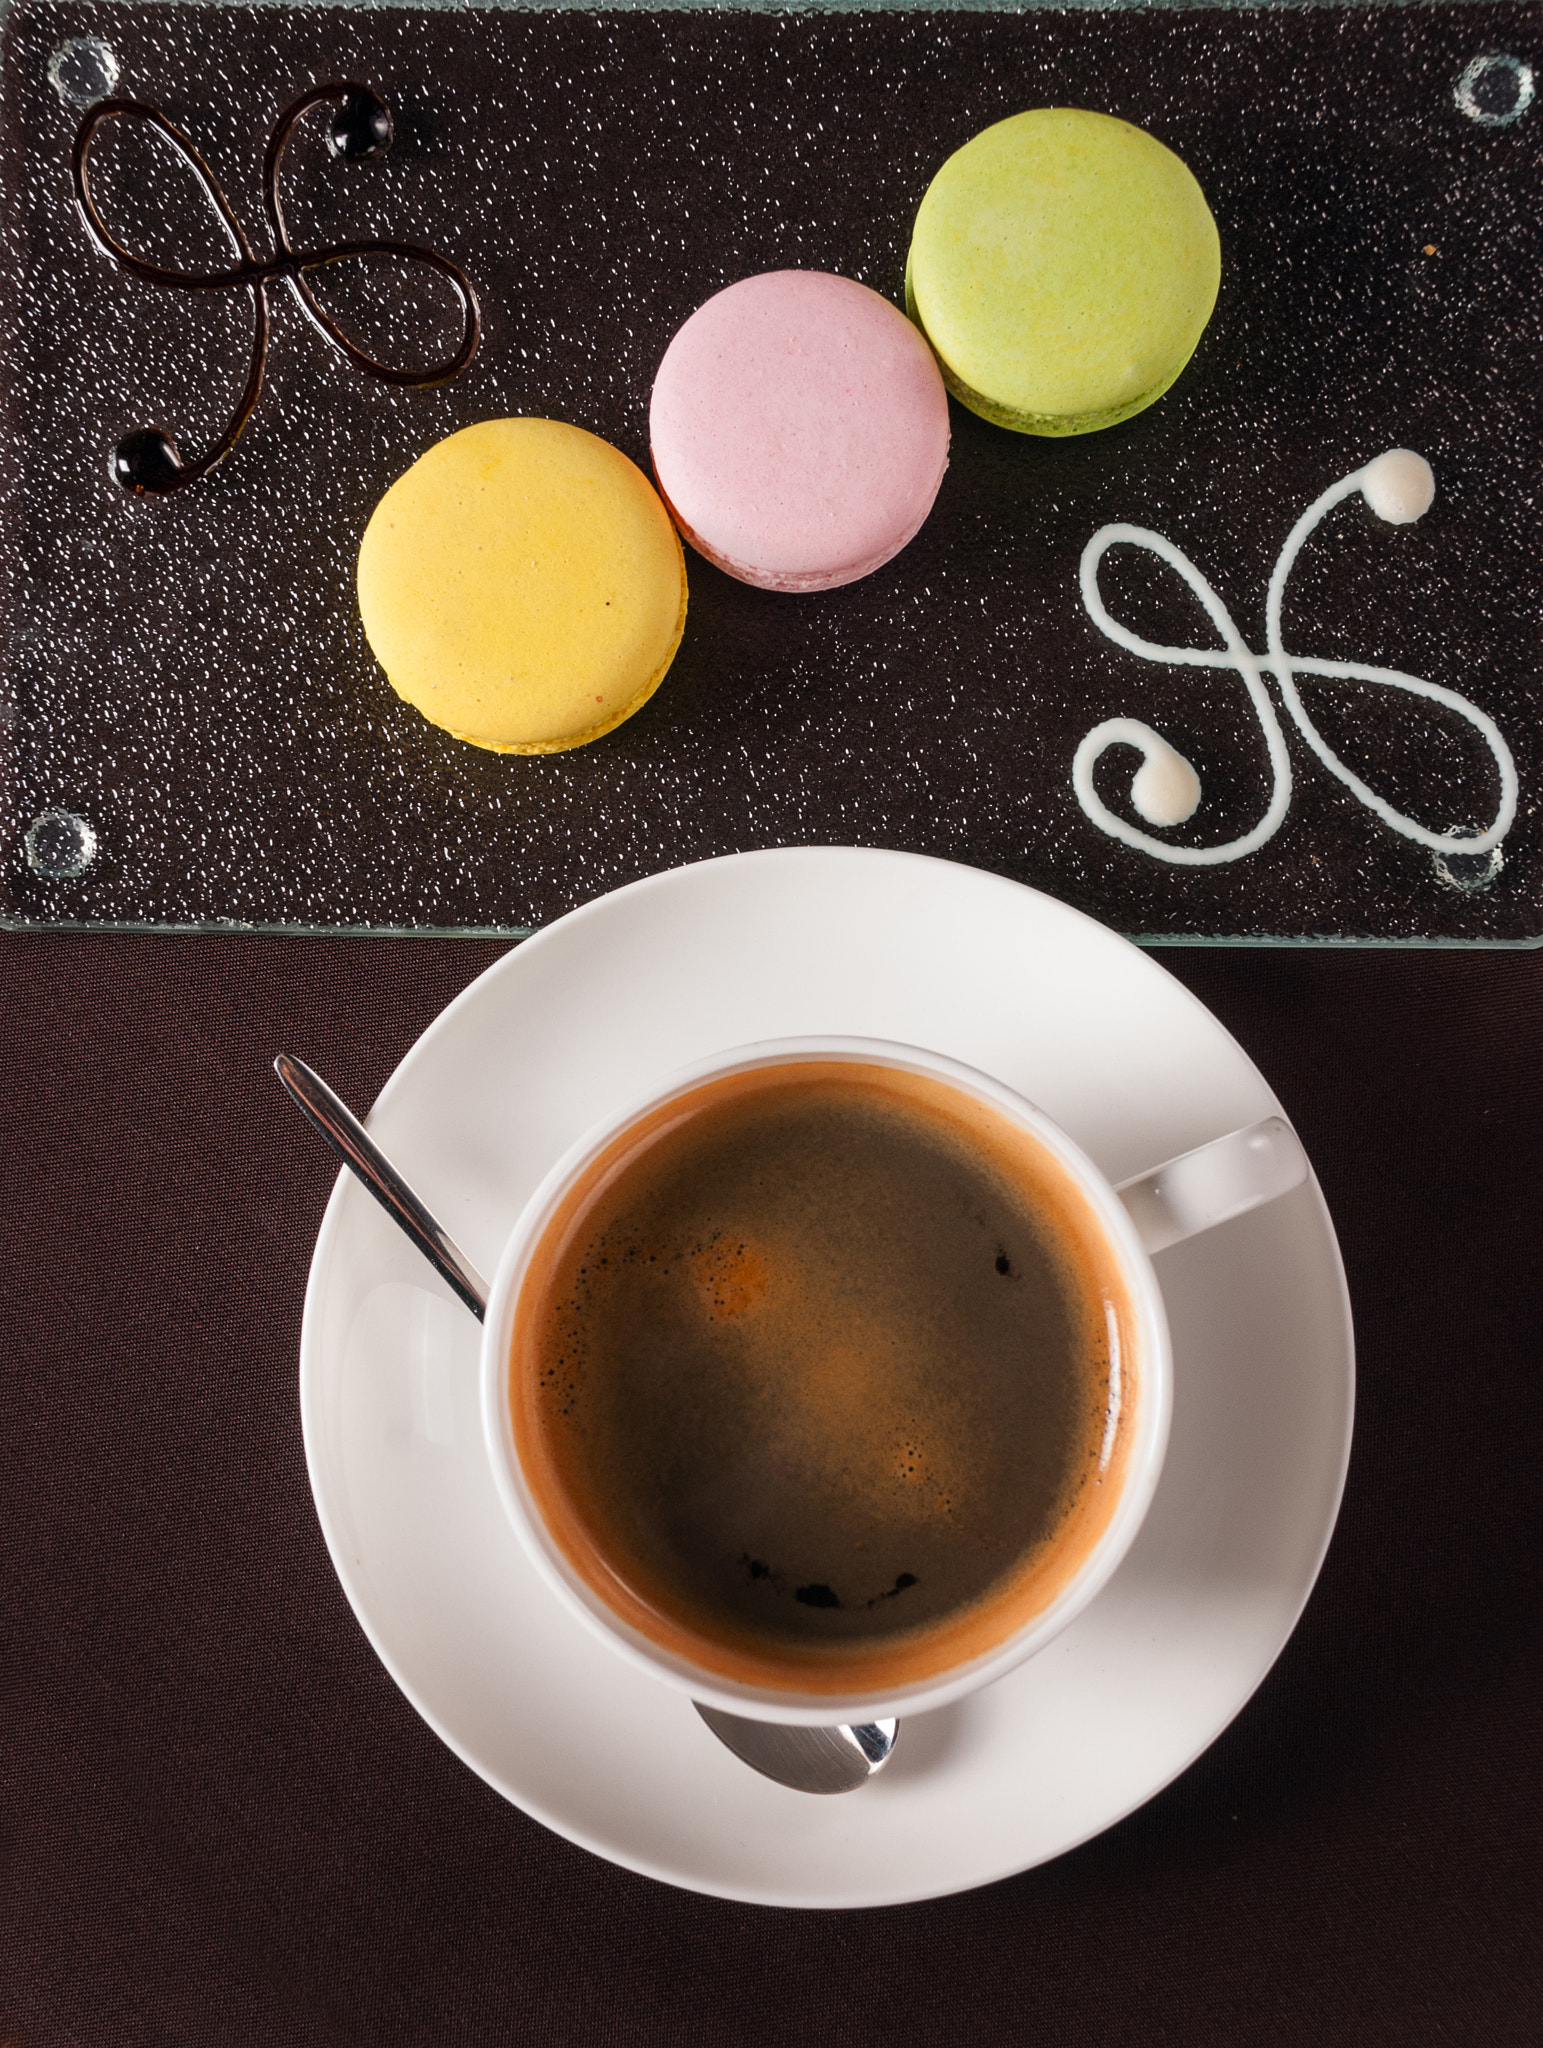 Nikon D60 sample photo. French macaroon dessert with a cup of coffee photography